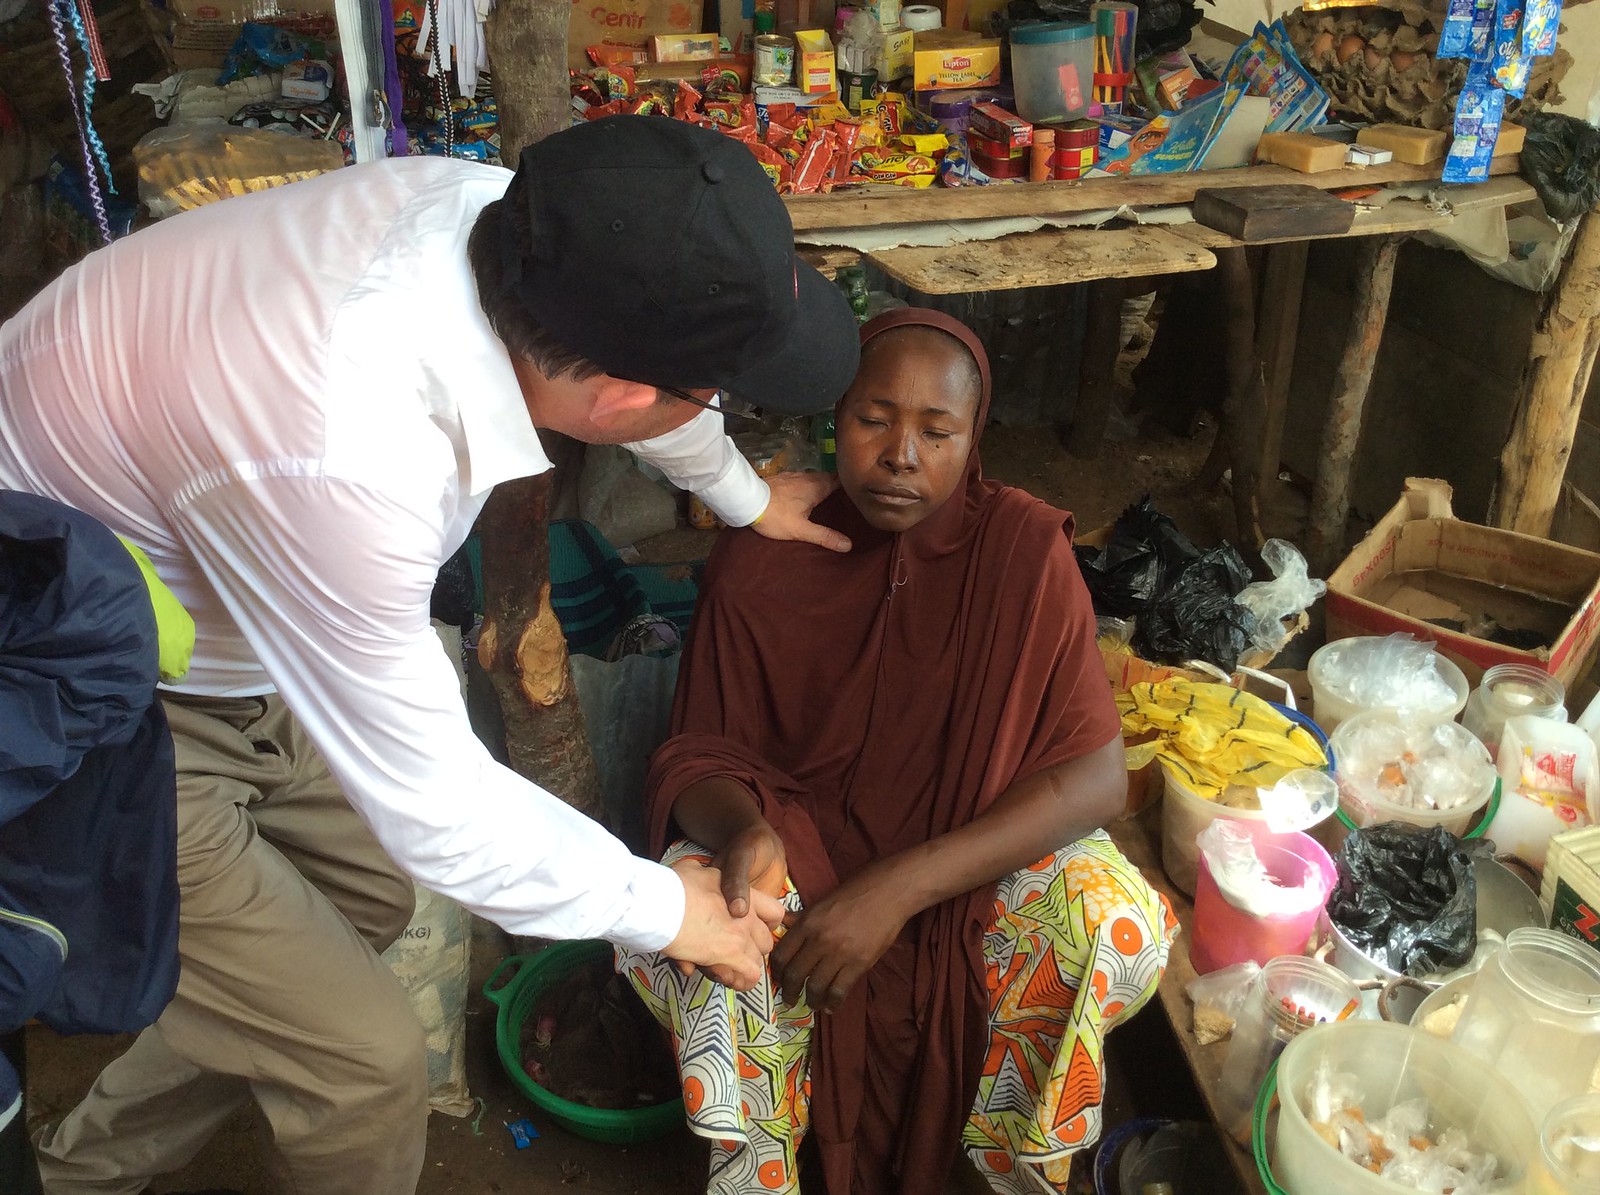 S&D MEPs visit the Malkohi official and unofficial refugee camps in Yola, in north-east Nigeria, which hosts thousands of internally displaced people fleeing Boko Haram and famine, during an S&D field visit to Nigeria and Guinea 2017